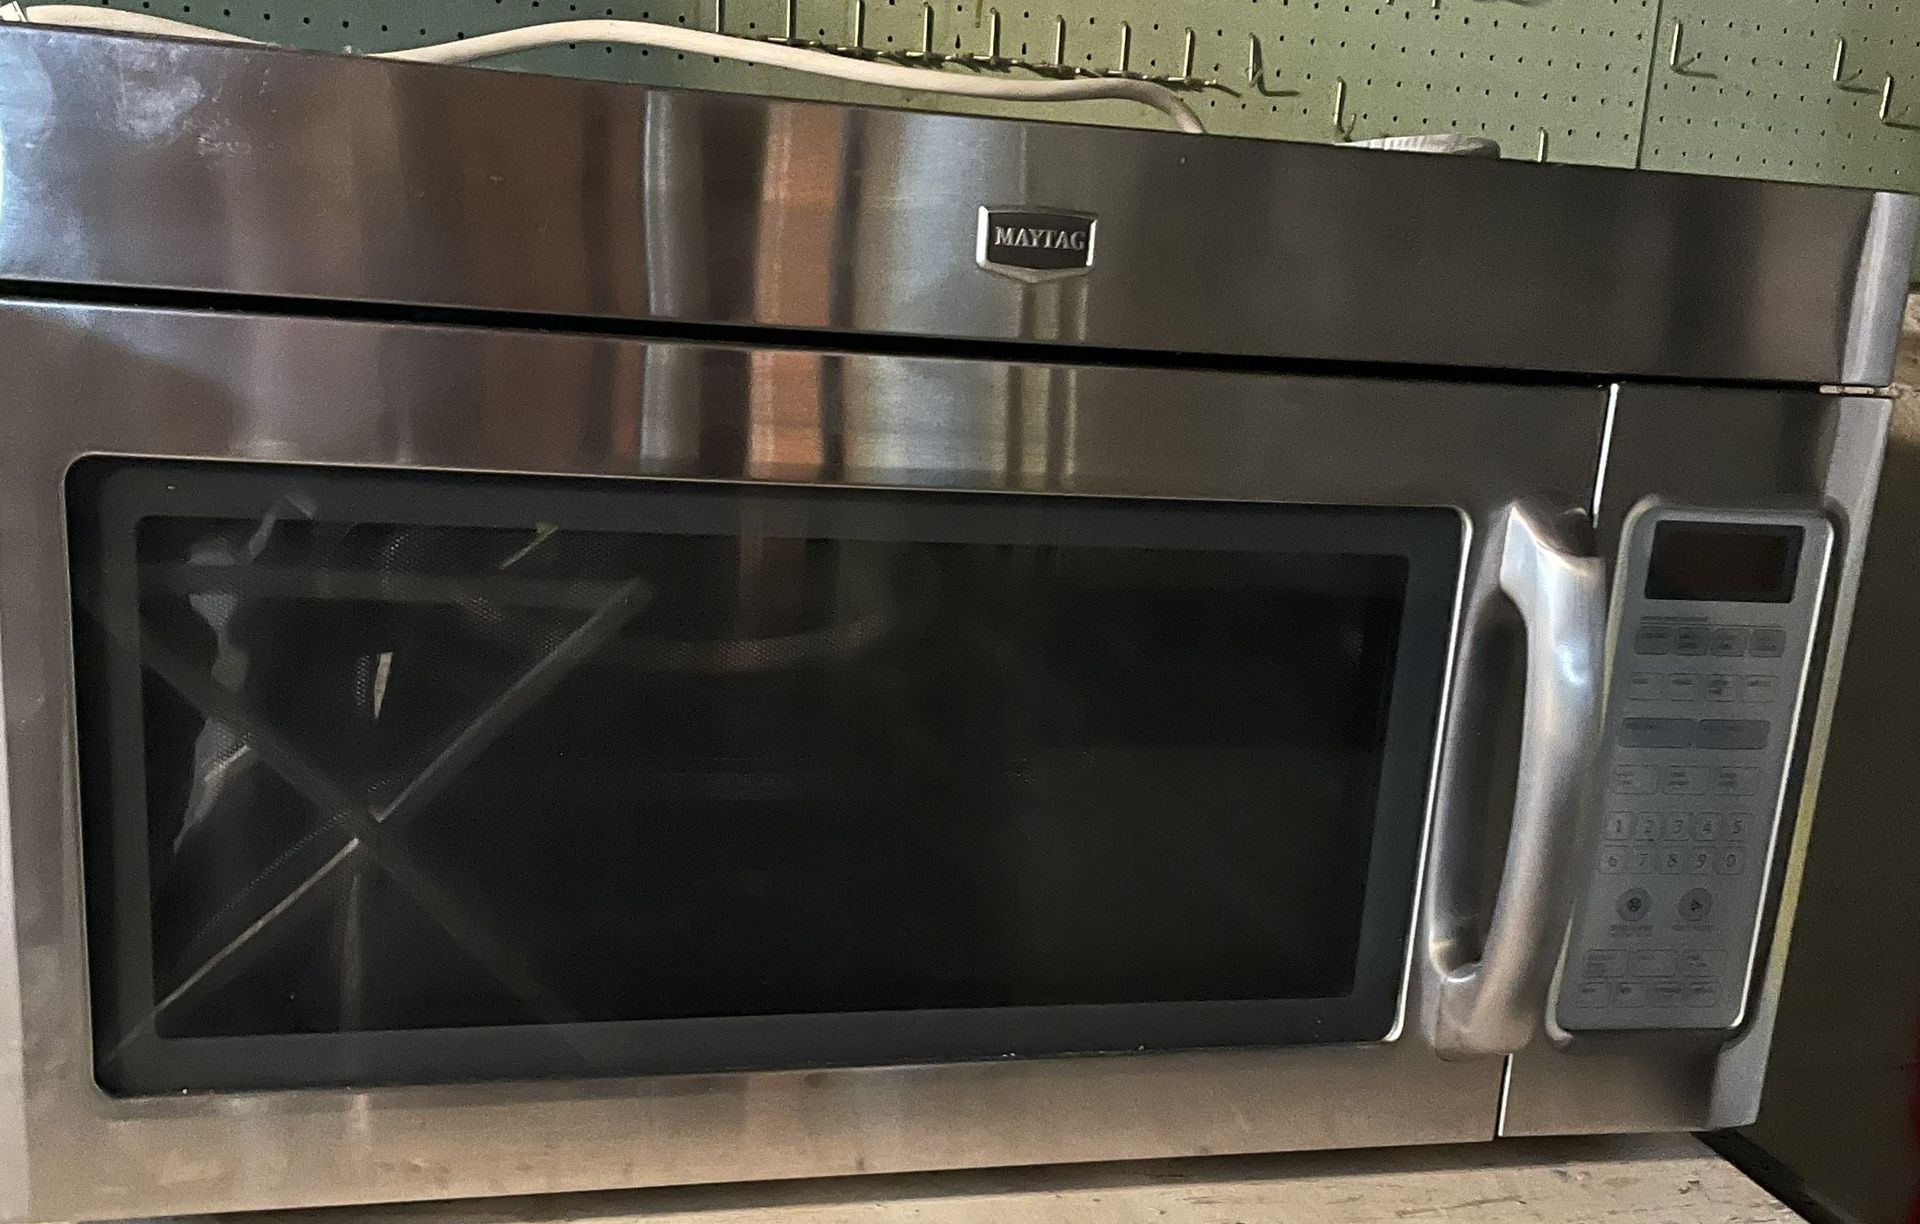 Over The Range Maytag Microwave With Venting